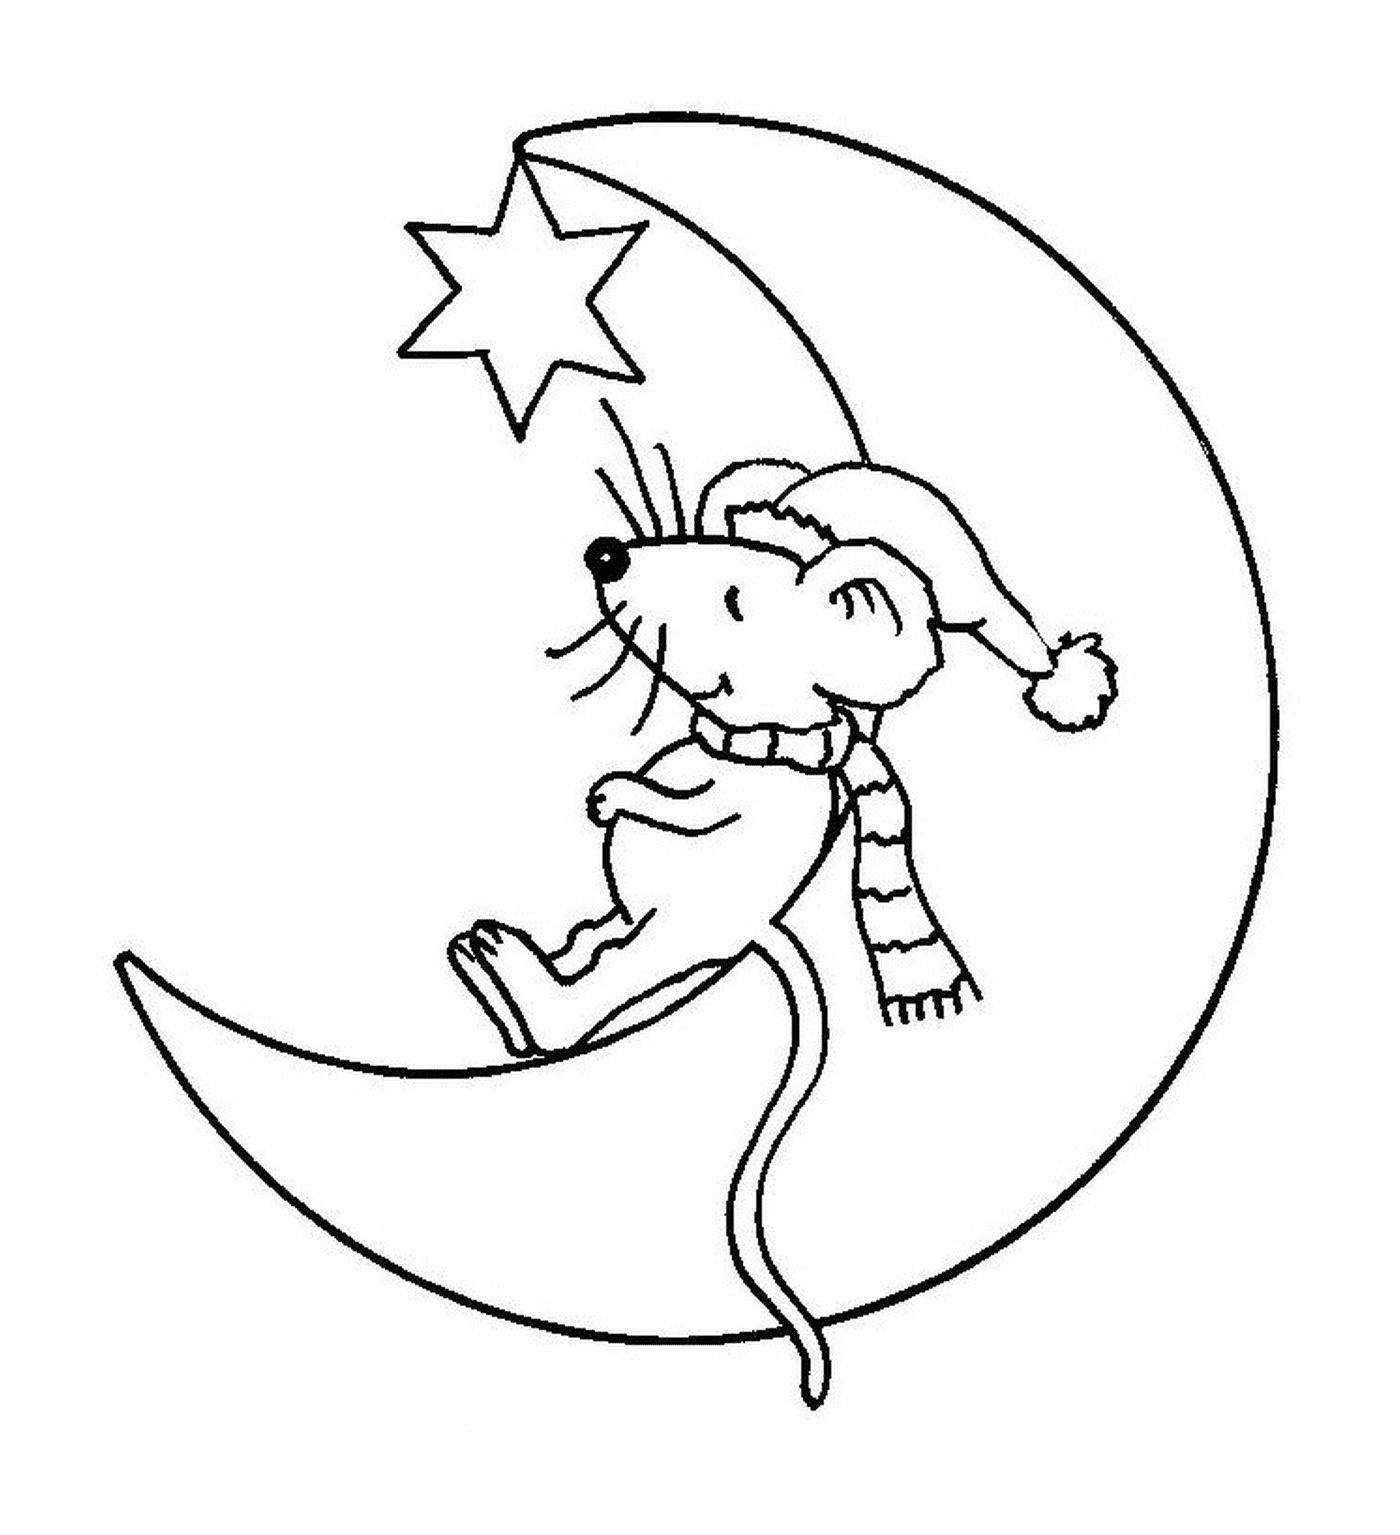  A mouse in the moon 